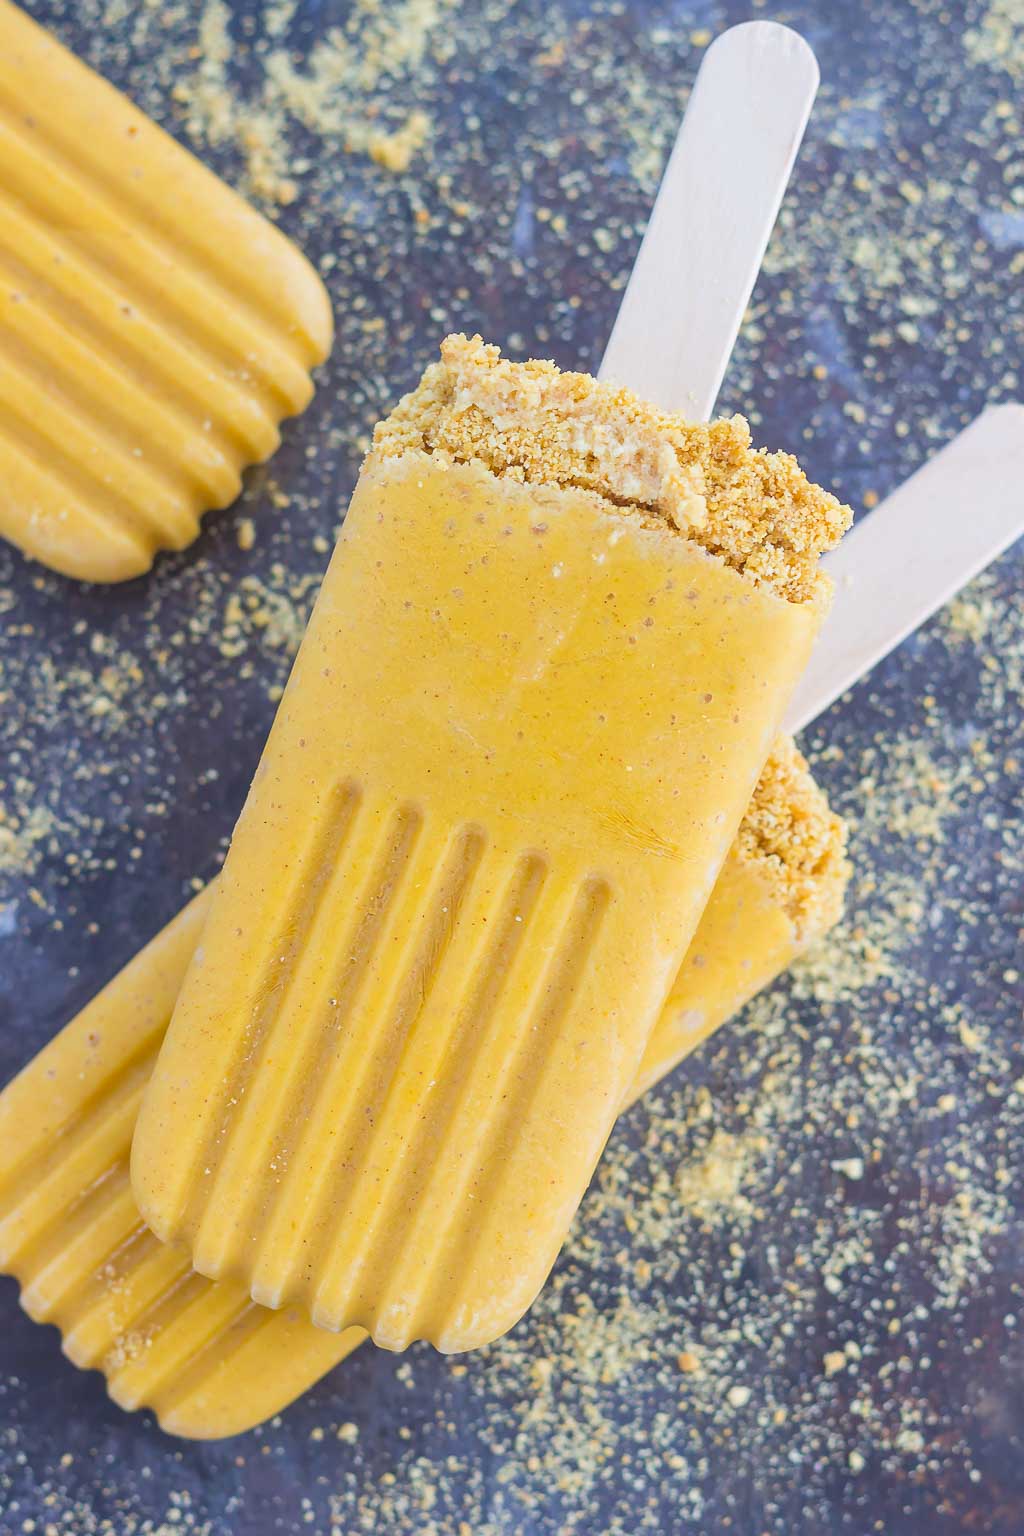 These Pumpkin Pie Pops taste just like the classic pie, but in frozen form. Sprinkled with a graham cracker crust and filled with healthier ingredients, these creamy pops are the perfect dessert for the season! #pumpkin #pumpkinpops #pumpkinpie #frozendessert #dessert #pumpkindessert #falldessert 